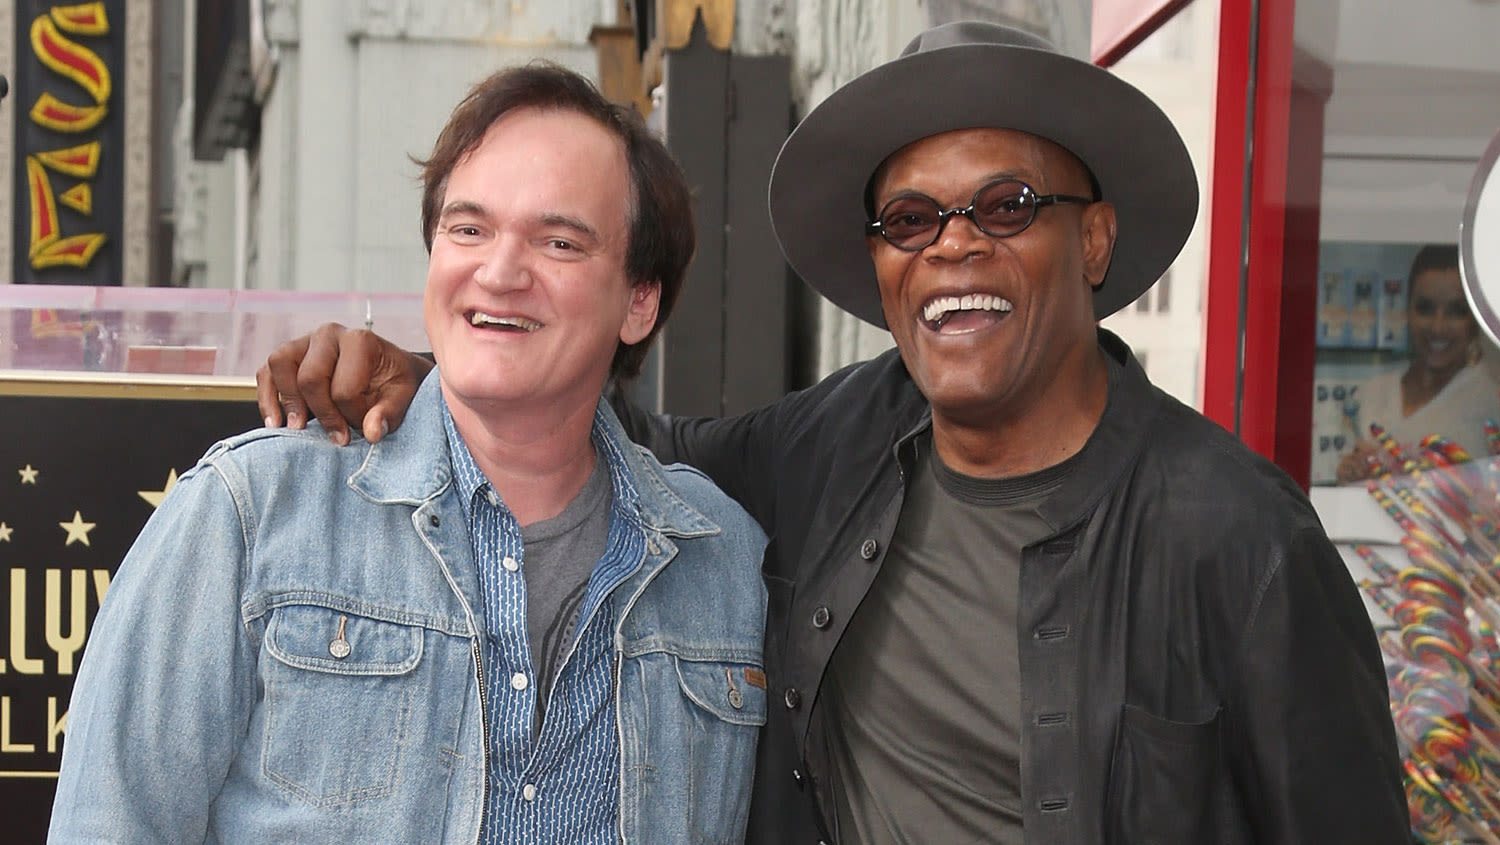 Samuel L. Jackson On Why He Loves Working With Quentin Tarantino